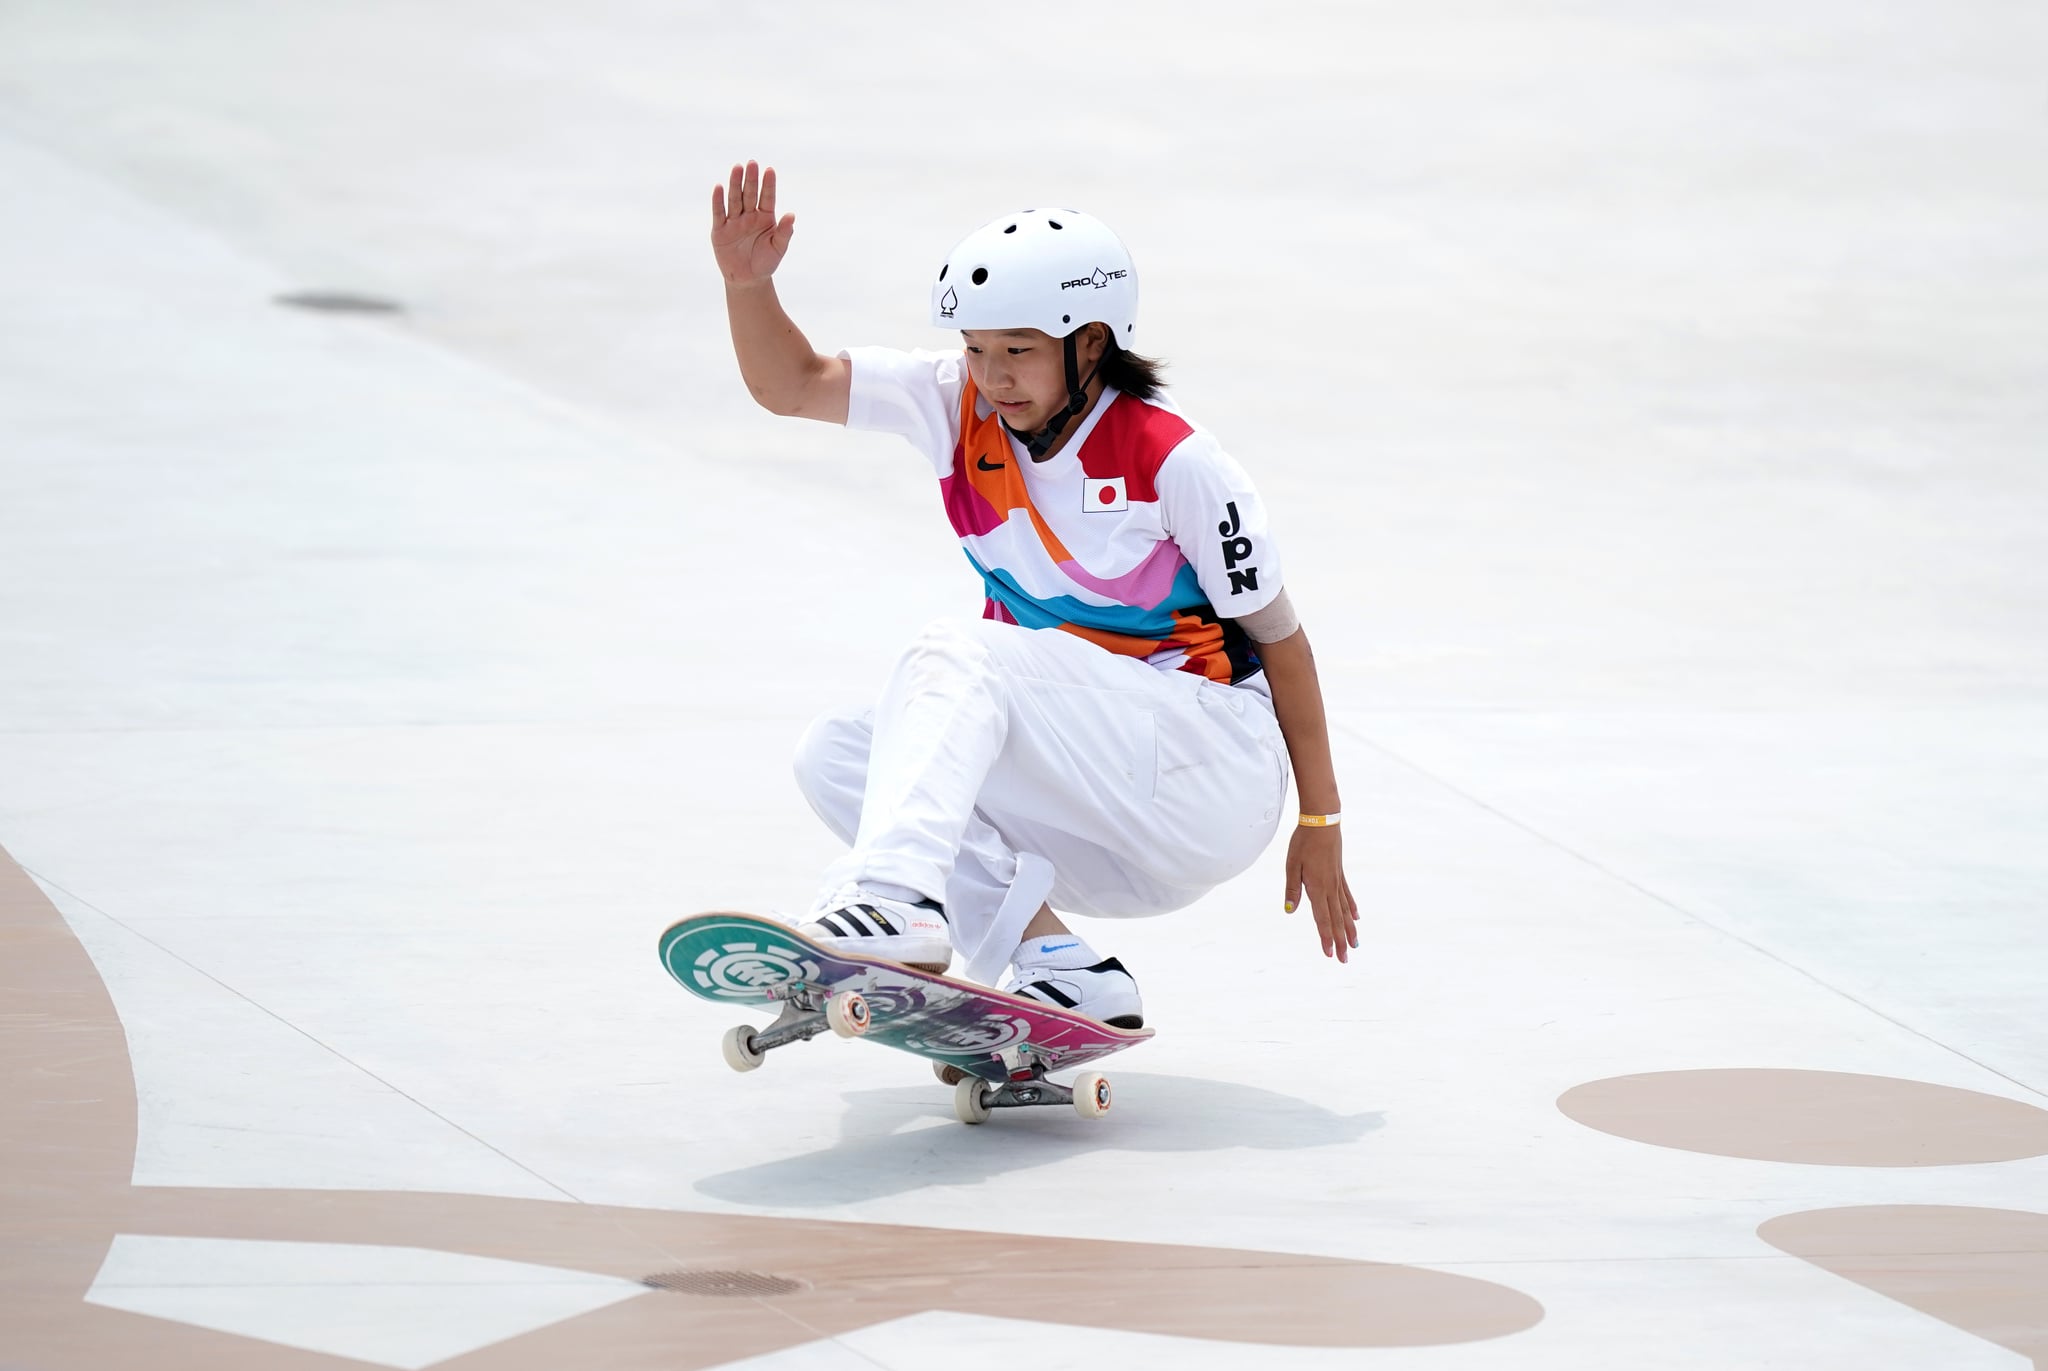 Japan's Momiji Nishiya during the Women's Street Final at the Ariake Urban Sports Park on the third day of the Tokyo 2020 Olympic Games in Japan. Picture date: Monday July 26, 2021. (Photo by Mike Egerton/PA Images via Getty Images)